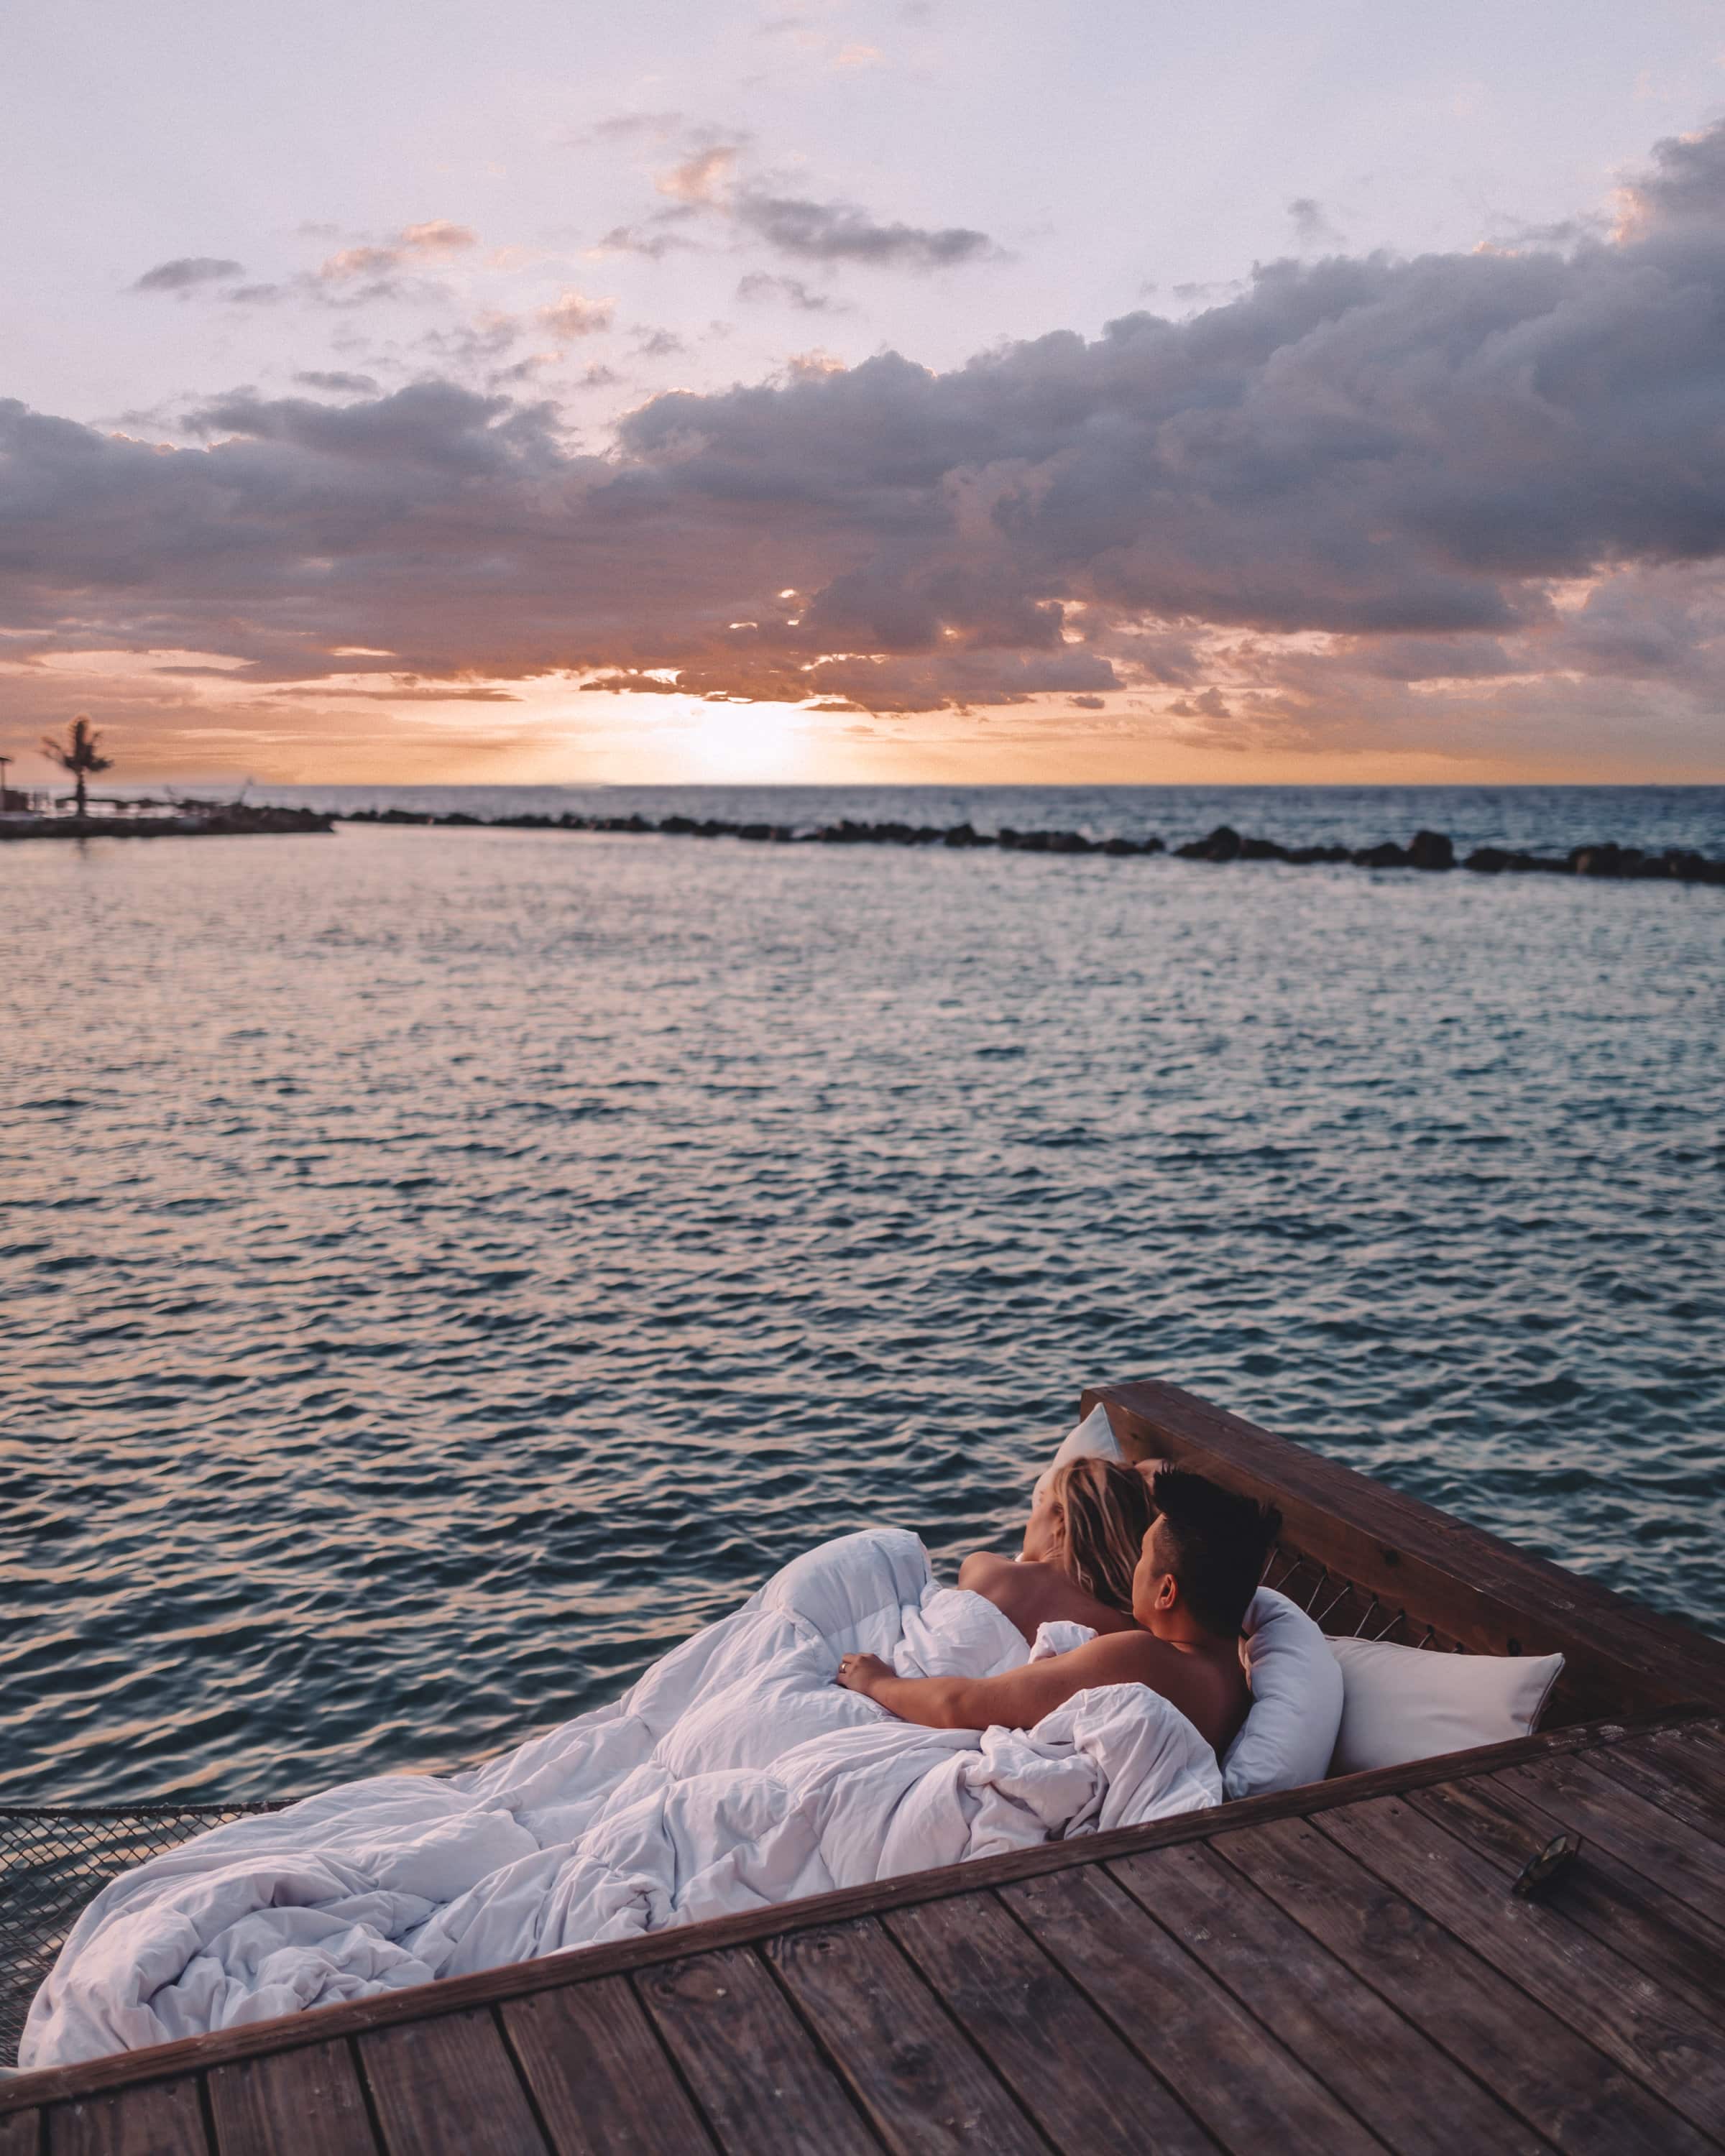 Head to "Lover's Island" in Aruba for the Ultimate Romantic Getaway